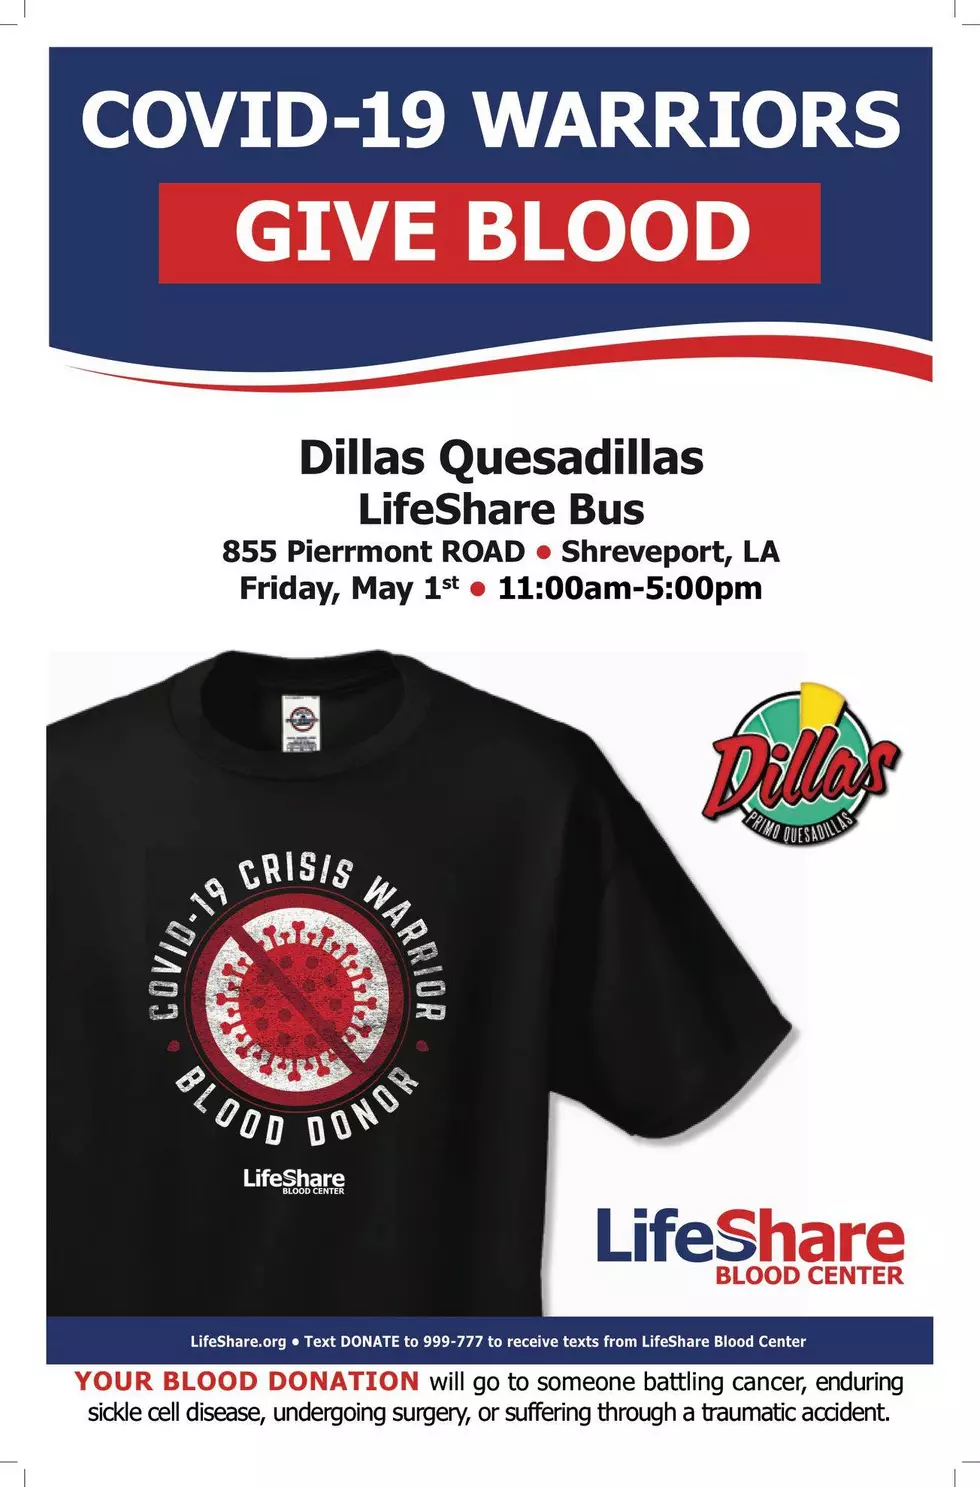 Dillas Partners with Lifeshare for Blood Drive